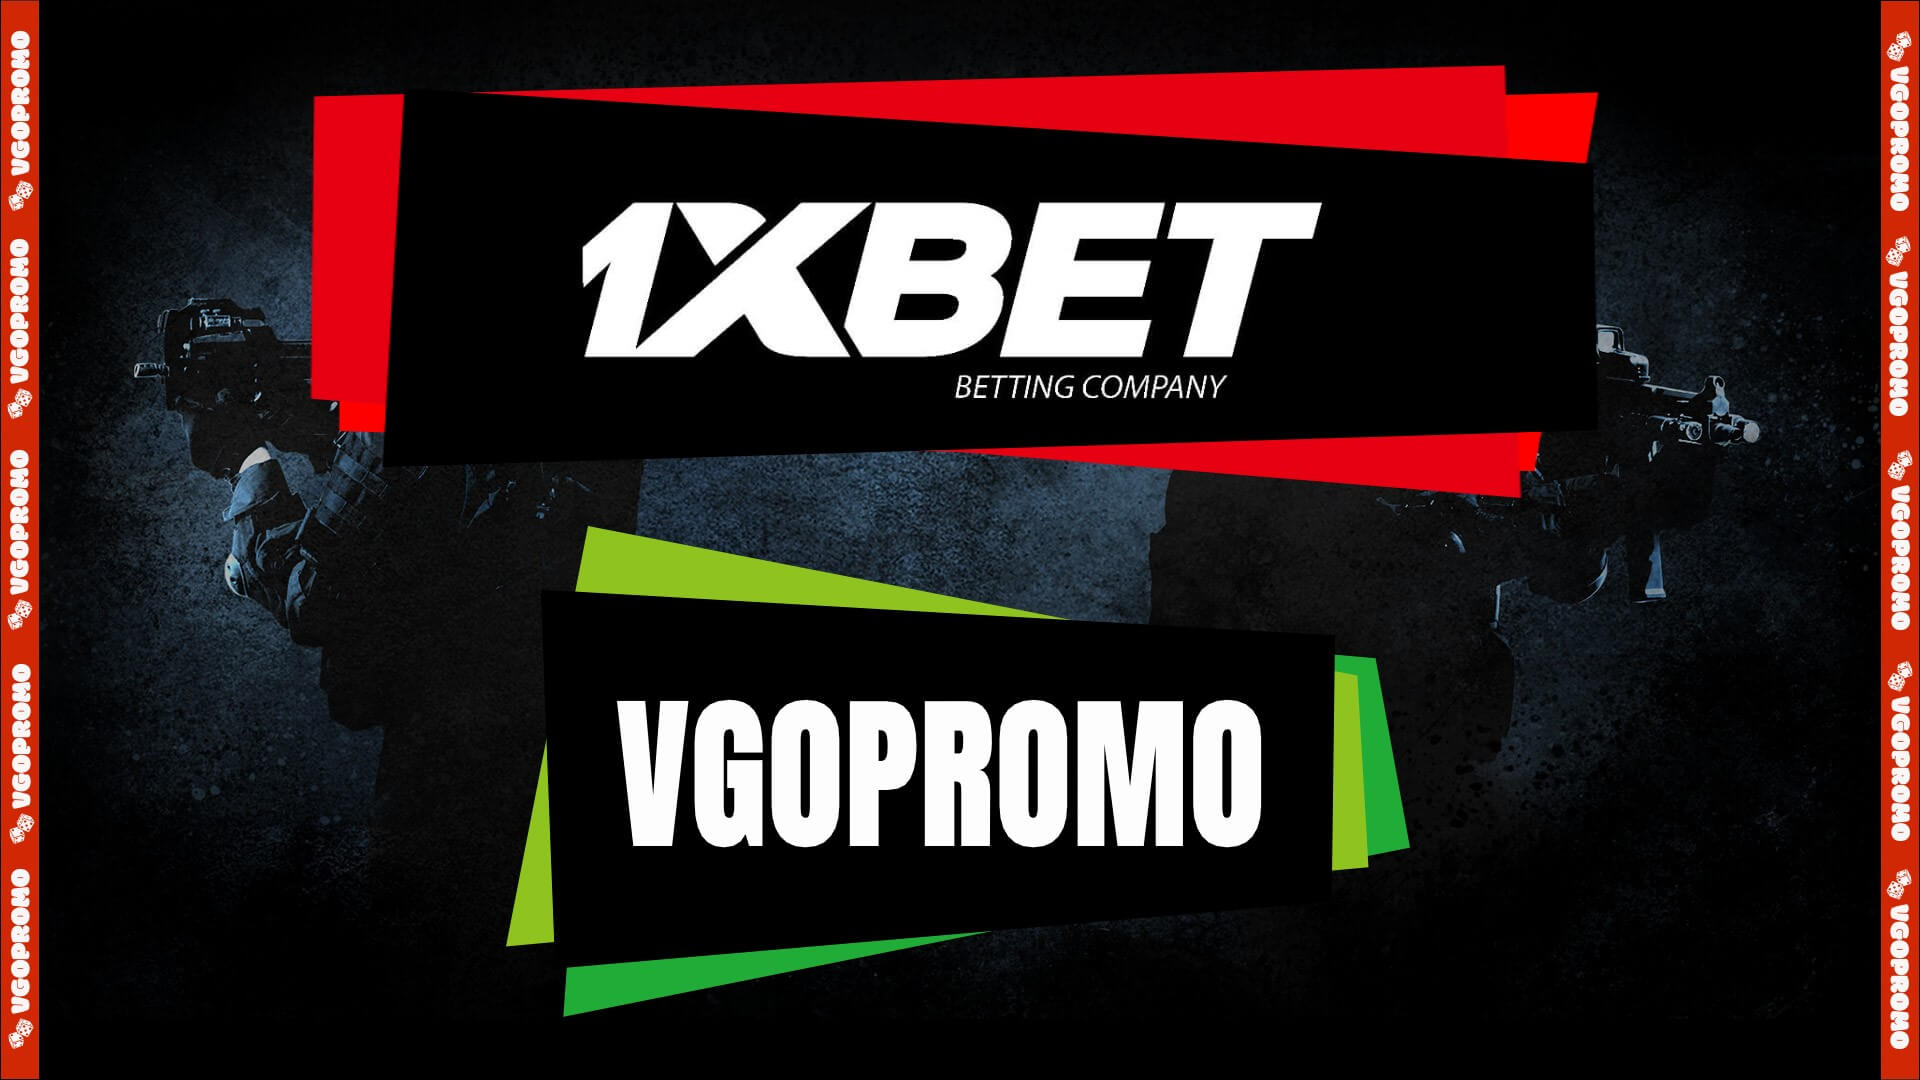 Top 10 1xBet Accounts To Follow On Twitter